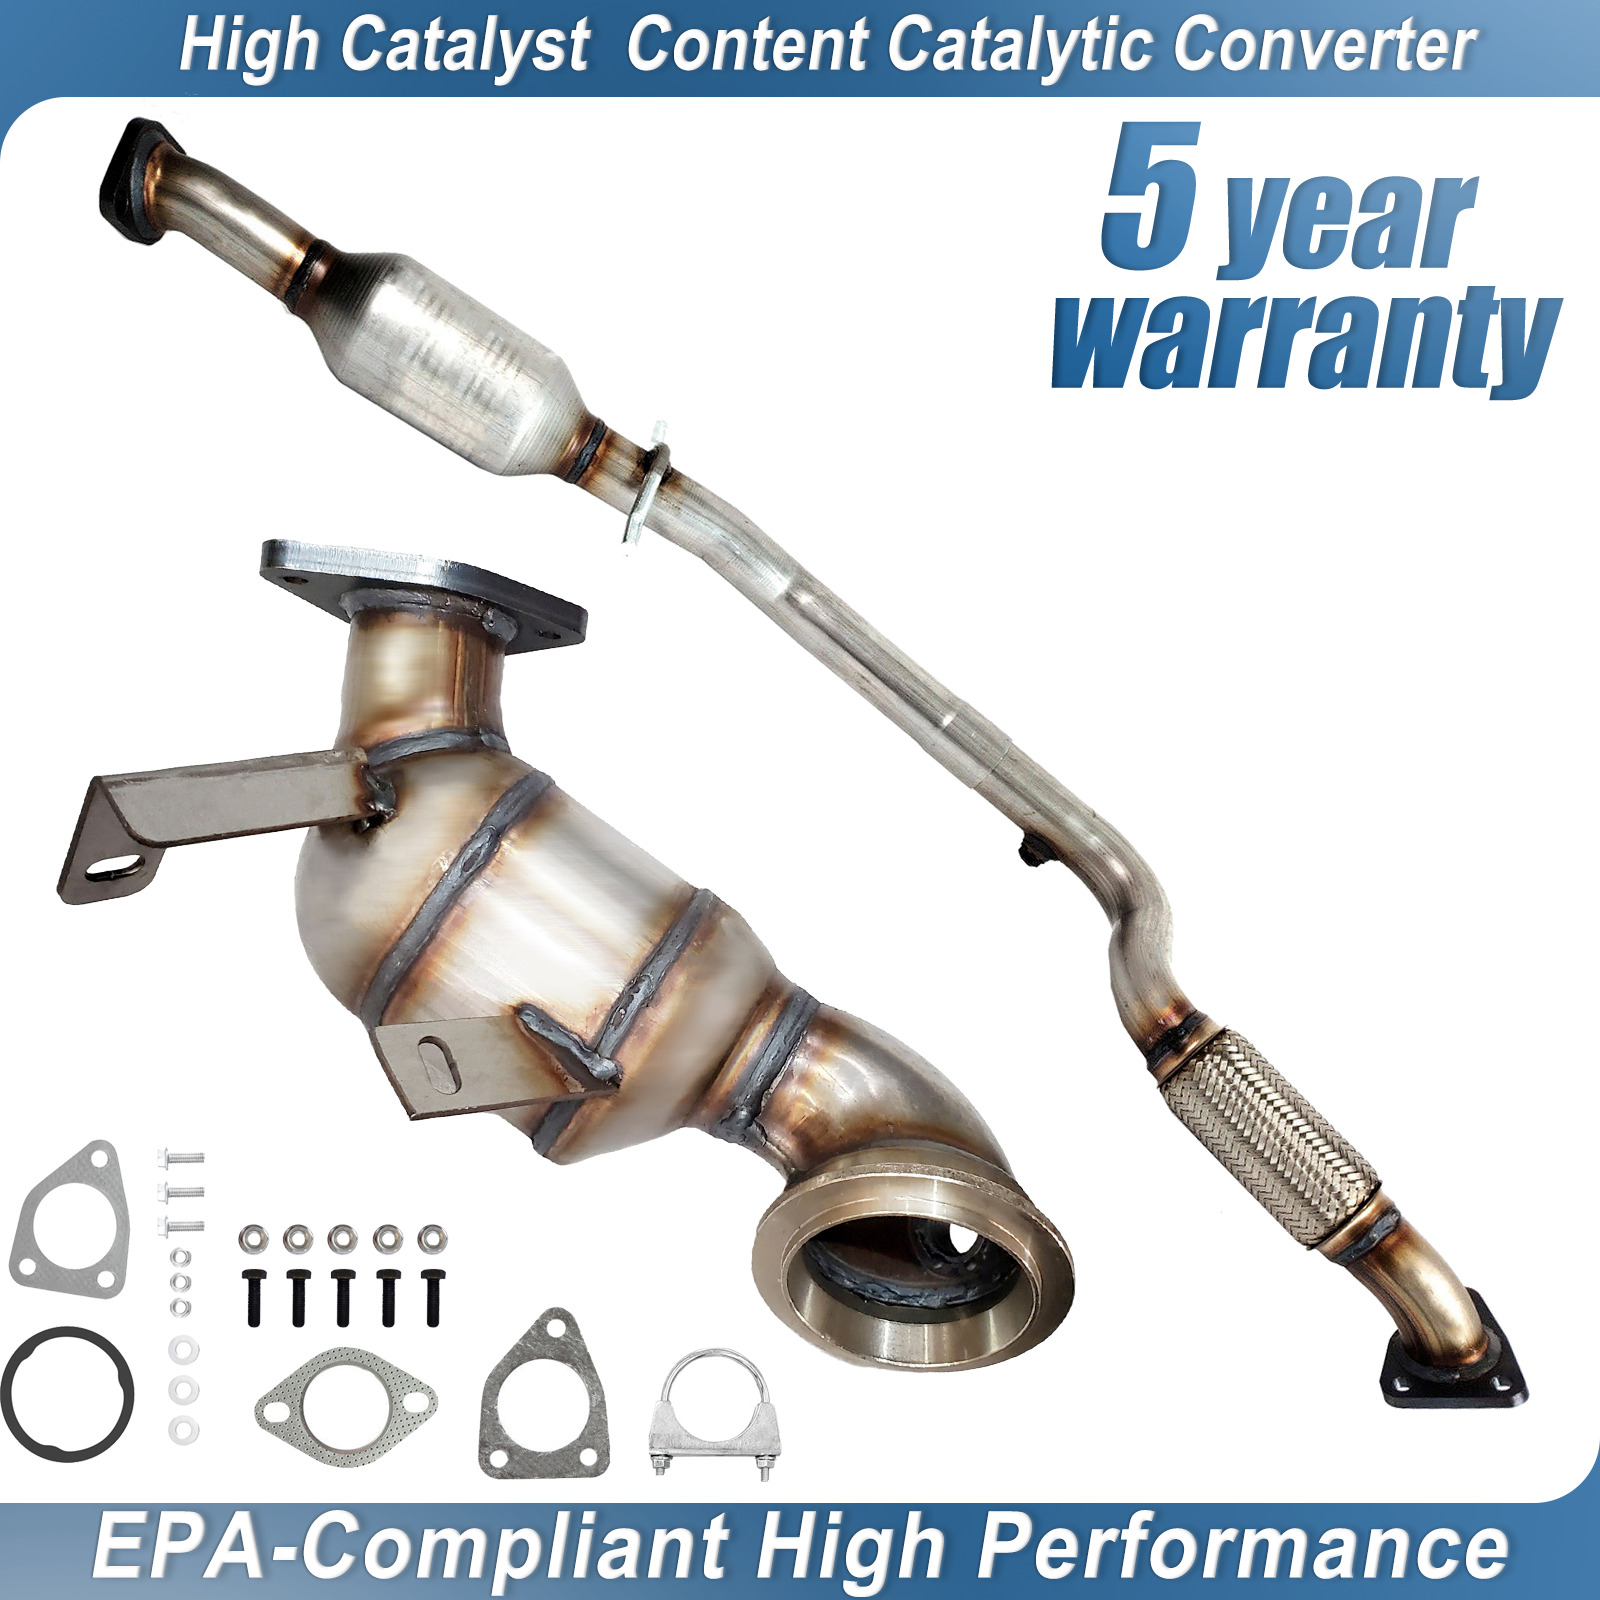 For Chevy Cruze 1.4L 2011-2015 Both Front & Rear Catalytic Converters 2 Pieces